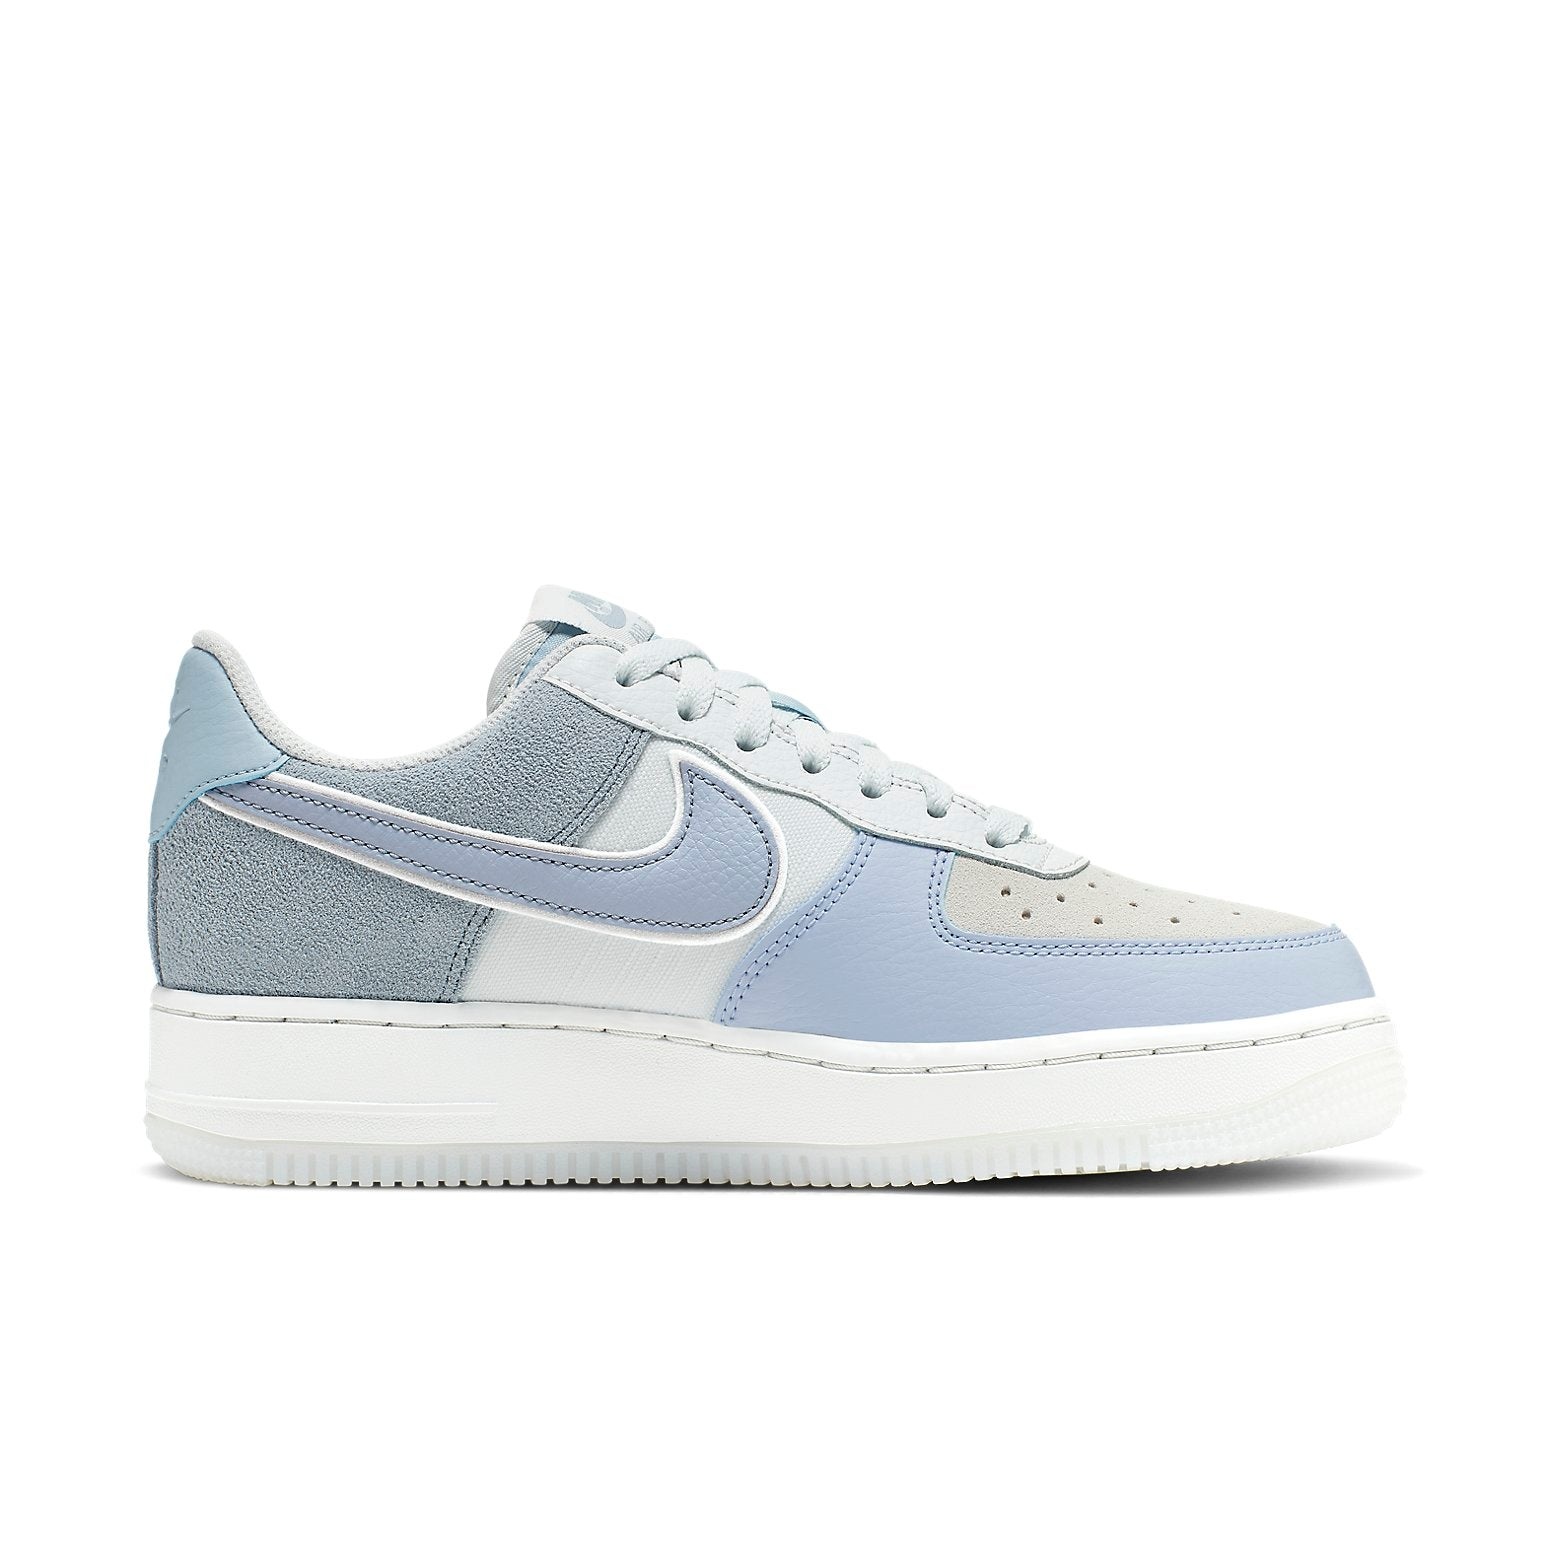 (WMNS) Nike Air Force 1 Low Premium 'Light Armory Blue' 896185-401 - 2